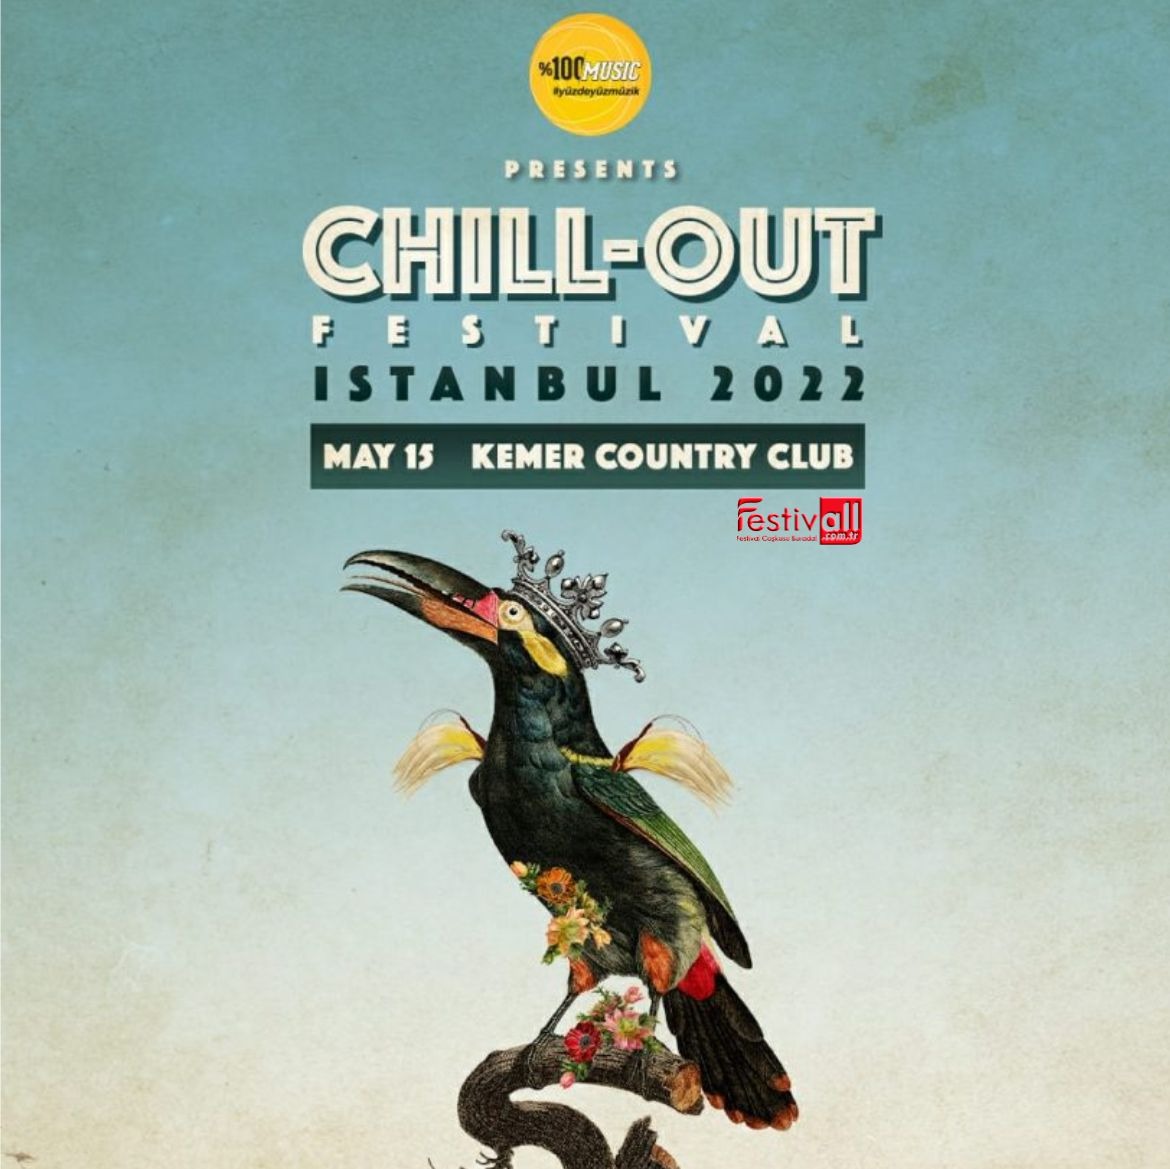 chill-out-festival-istanbul-149